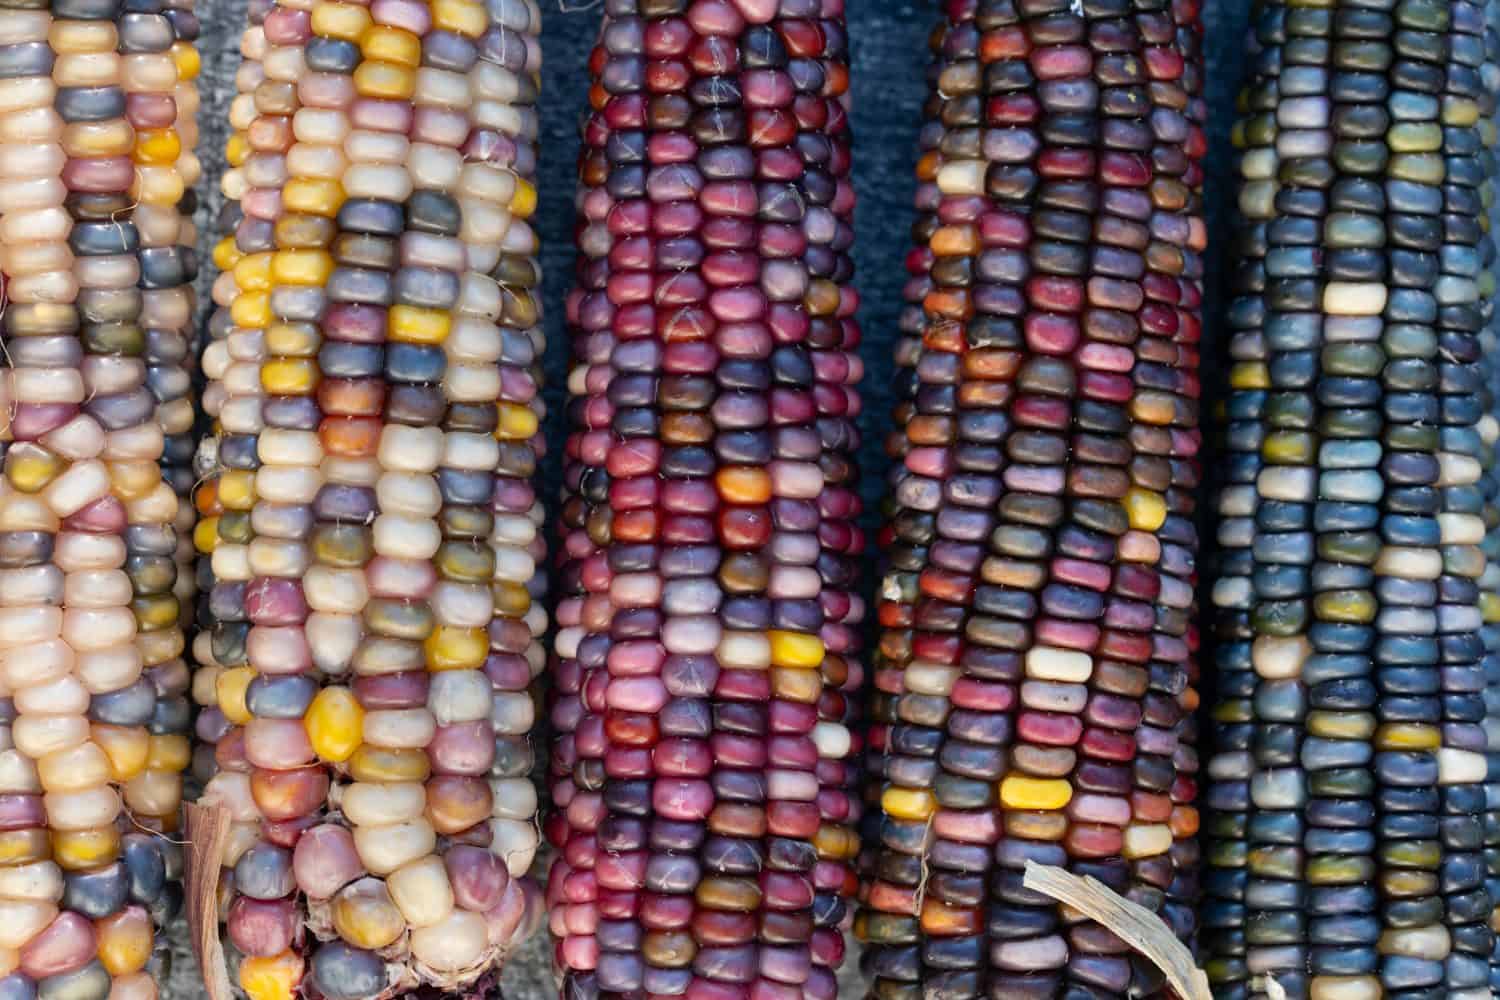 Several colorful corn cobs of different colors lie next to each other. The ornamental corn comes in pink, blue, yellow and white. The corn forms a background.